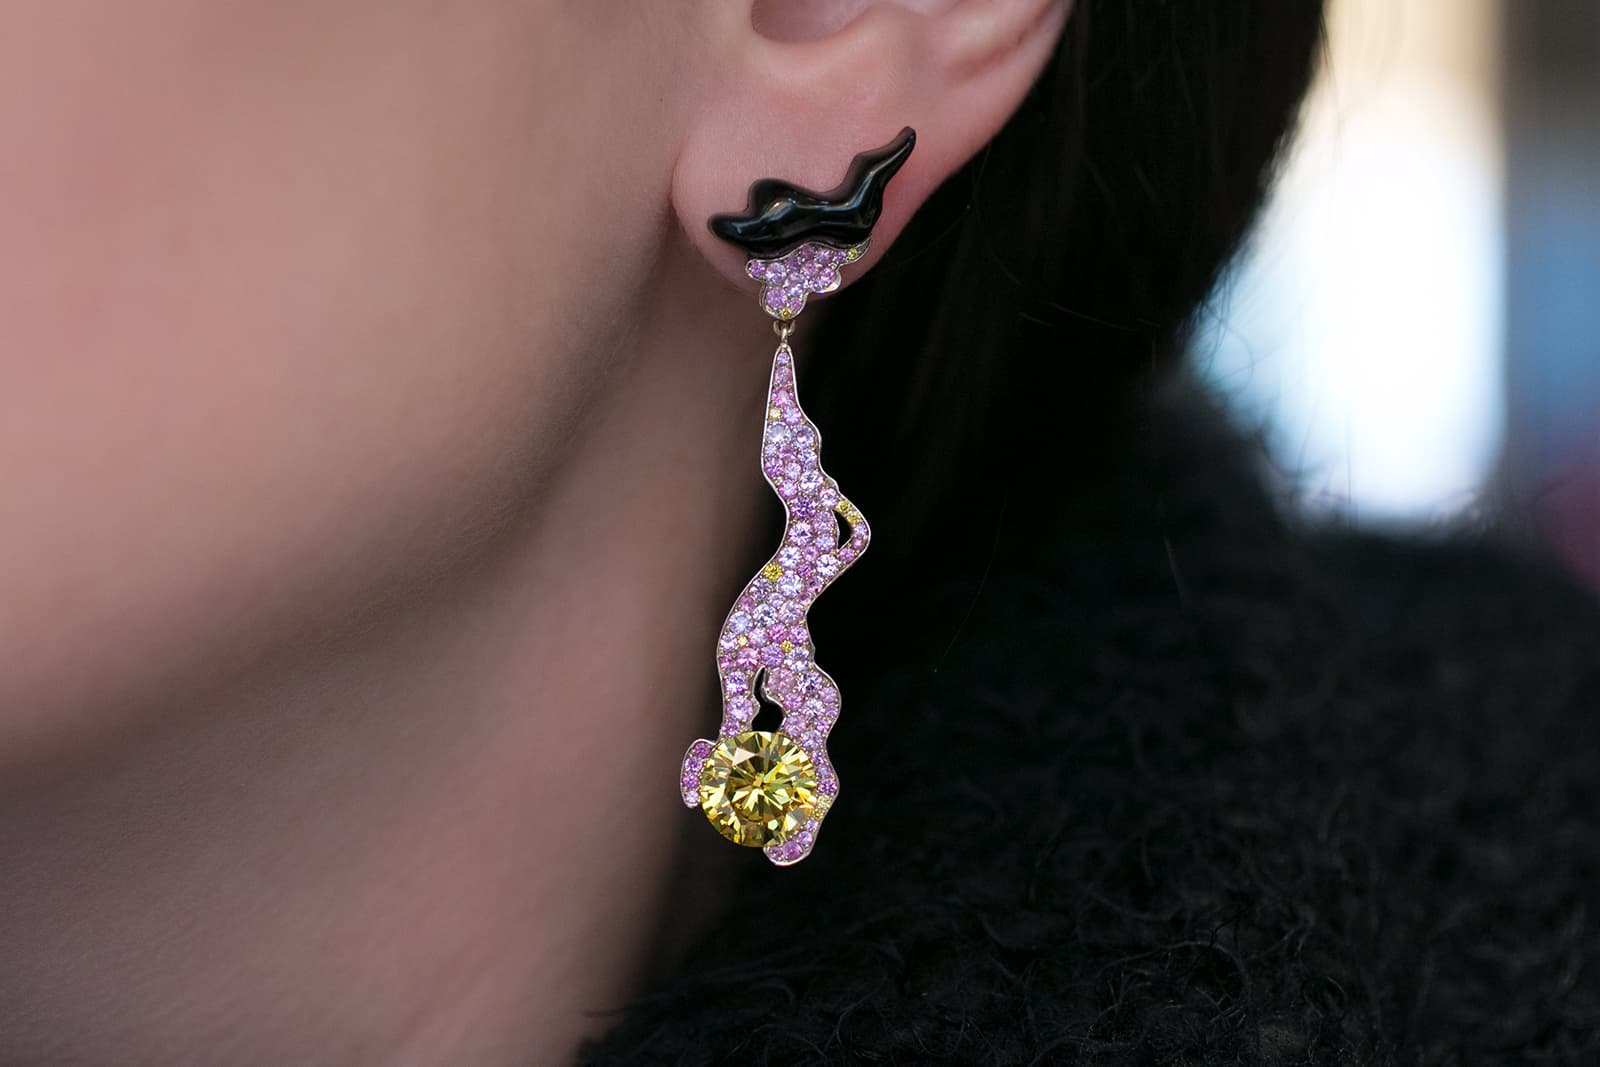 Joseph Ramsay ‘The Fabric of Jewellery’ collection ‘Nymph’ earrings with a pair of Fancy Vivid Yellow round brilliant cut diamonds weighing 3.01ct each, pink sapphires and black jet burns in blackened yellow gold